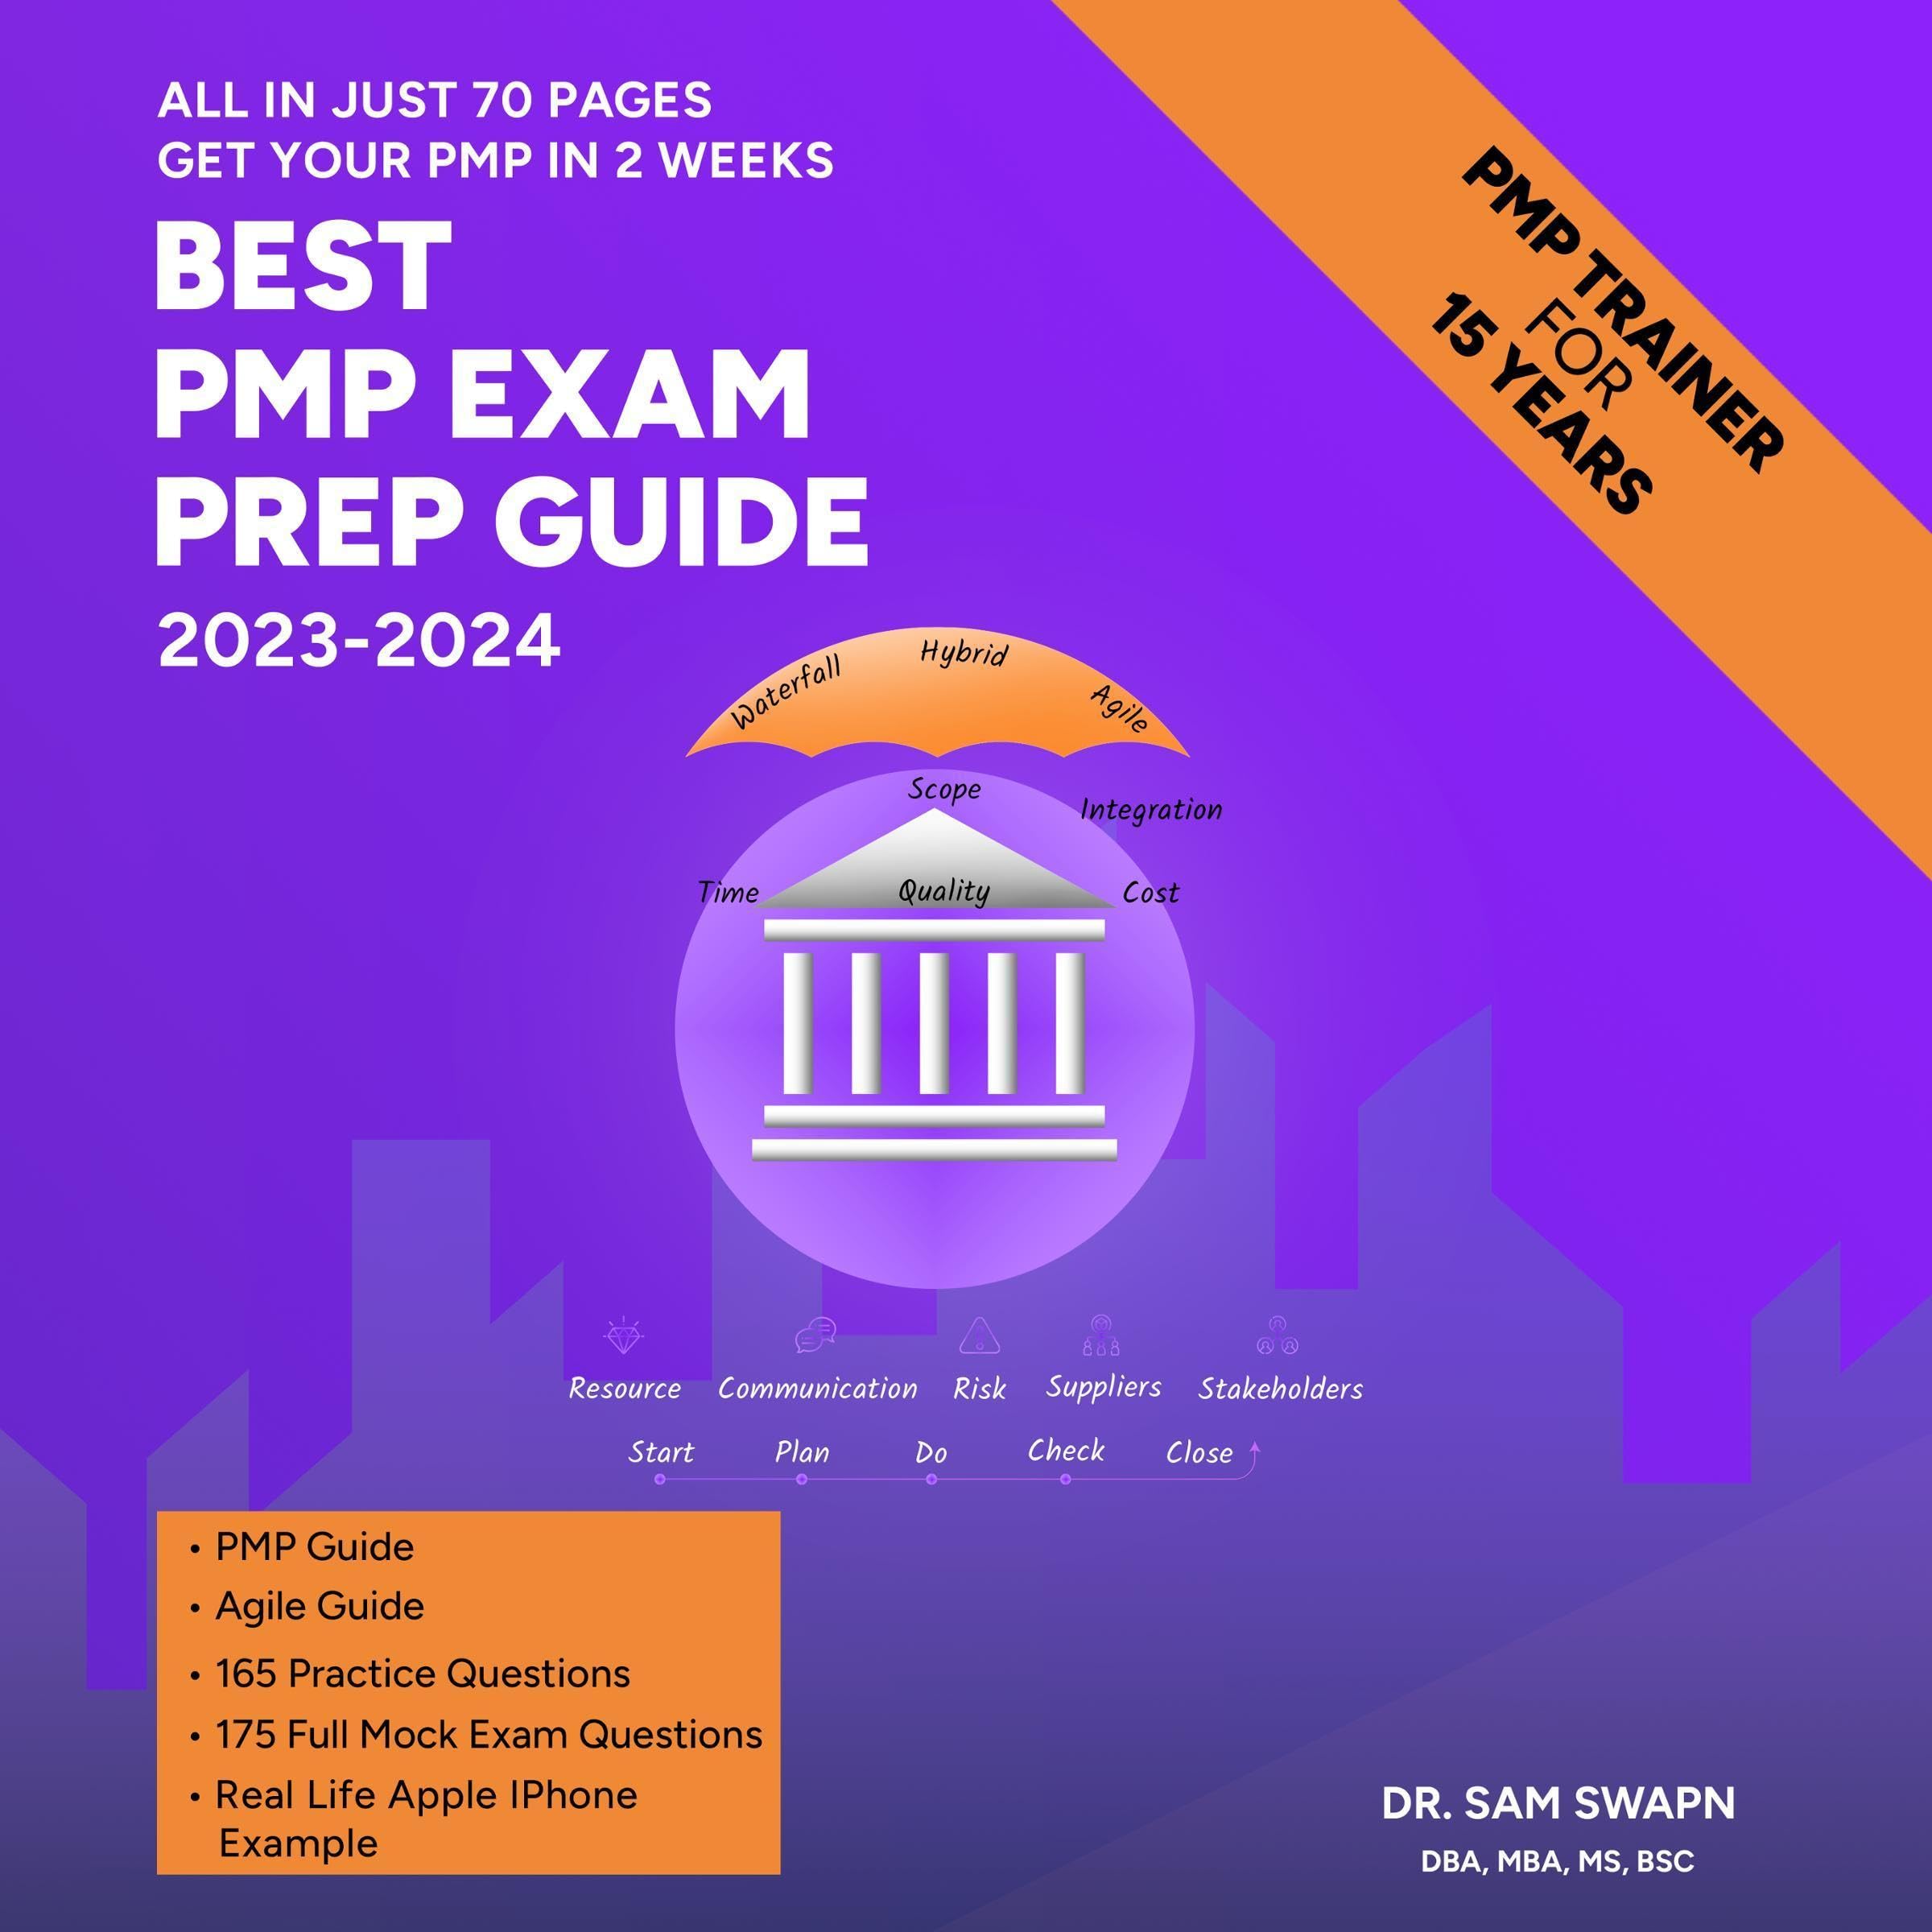 Best PMP Exam Prep Guide 2023- 2024: Get PMP Certified in 2 Weeks- Study 2 Hours a Day Before-After Work